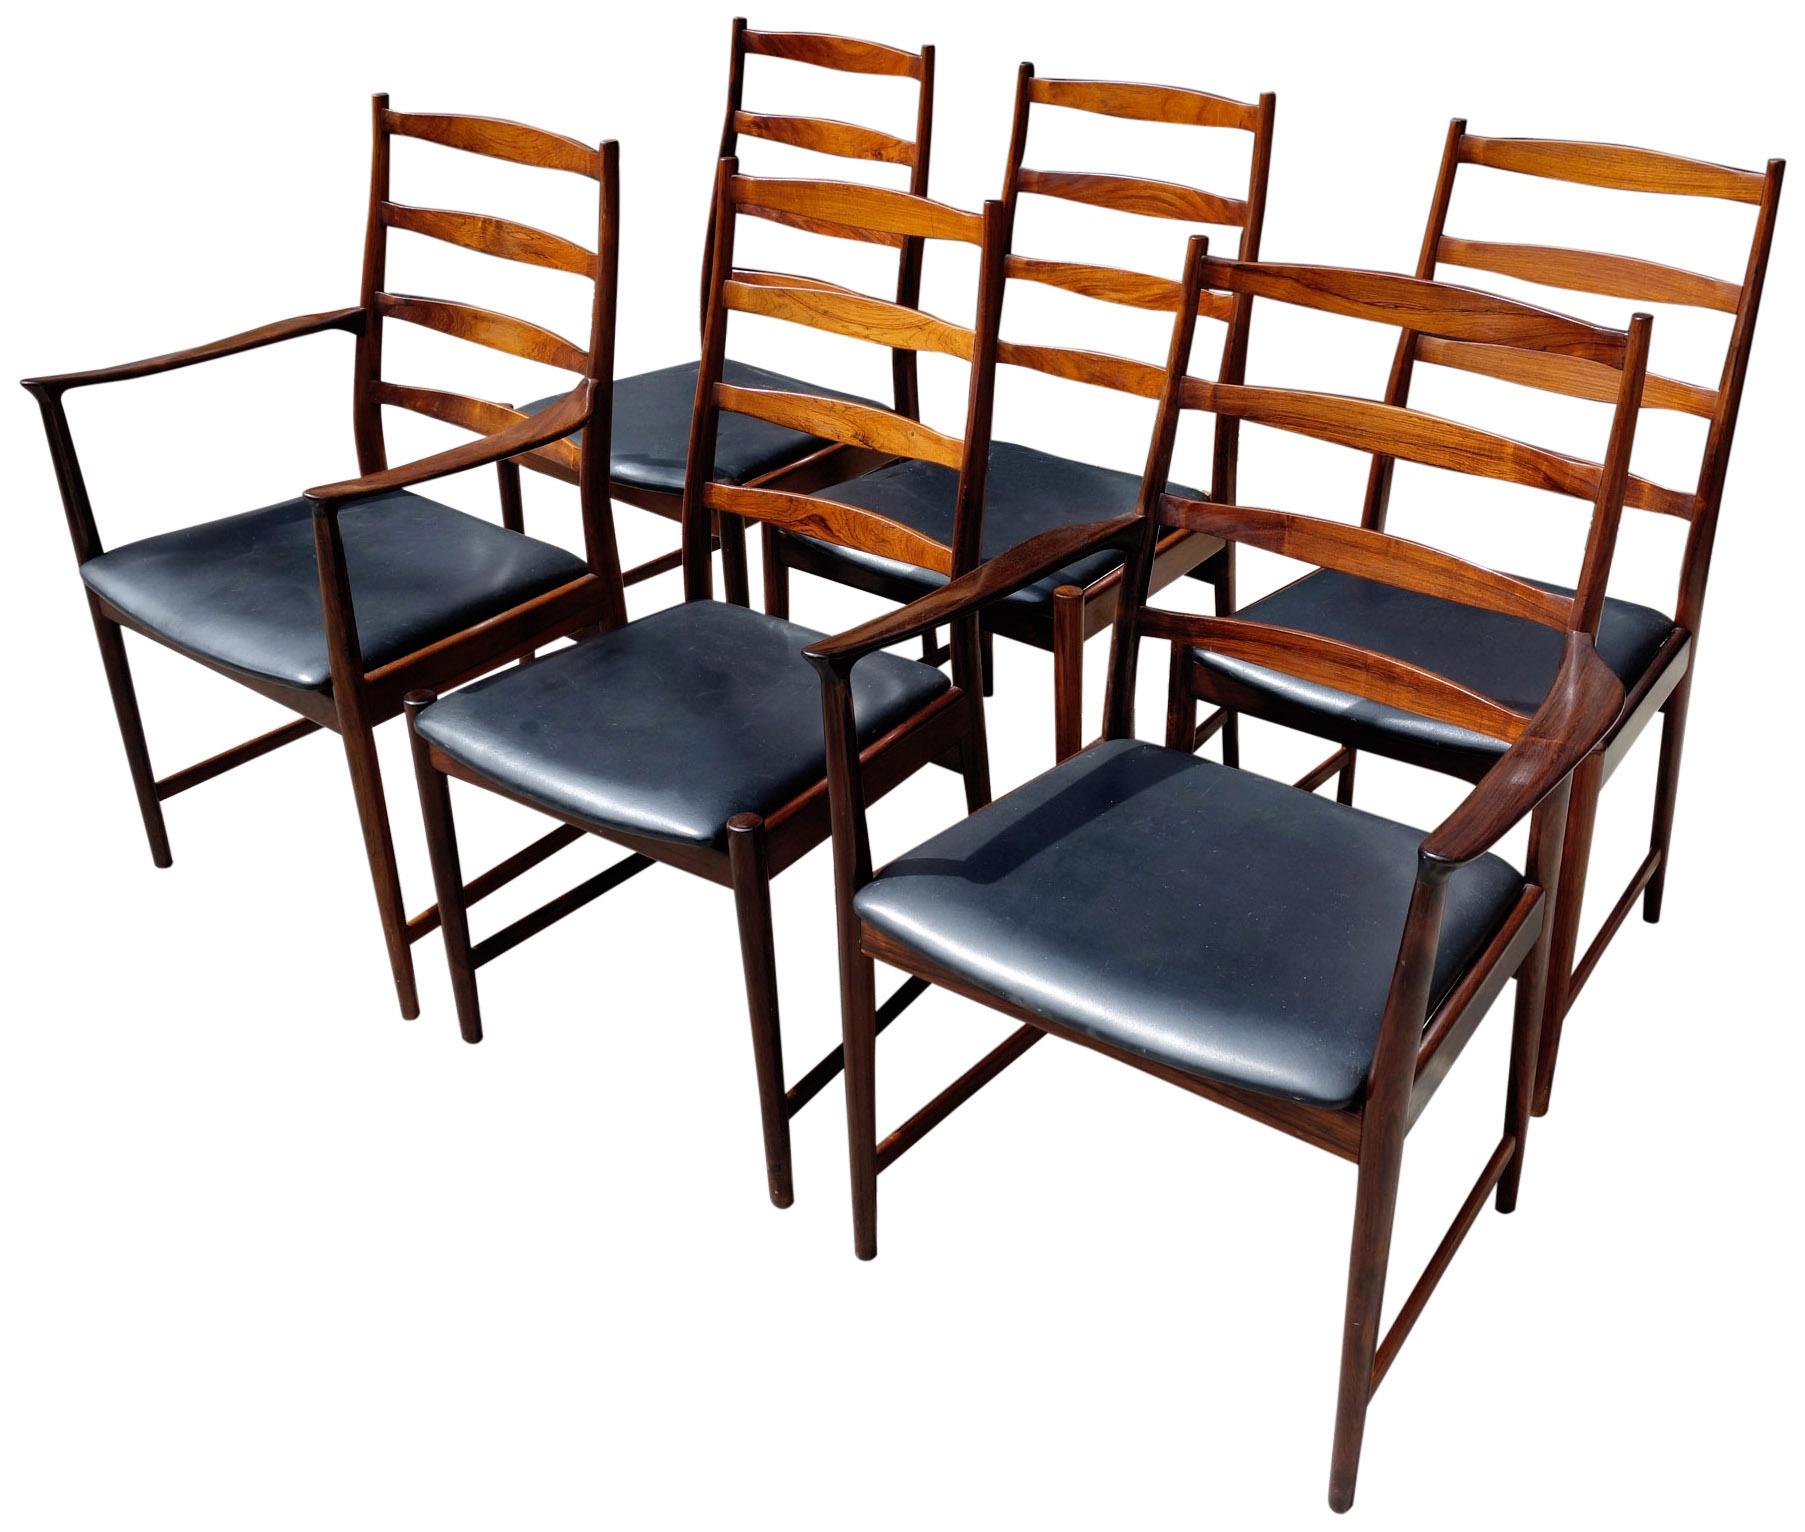 Wonderful set of 6 (six) rosewood dining chairs featuring two armchairs and 4 (four) side chairs. Very comfortable and of high quality. Vamo Sonderbor of Denmark employed designers such as Johannes Andersen, Arne Vodder, and Torbjorn Afdal.